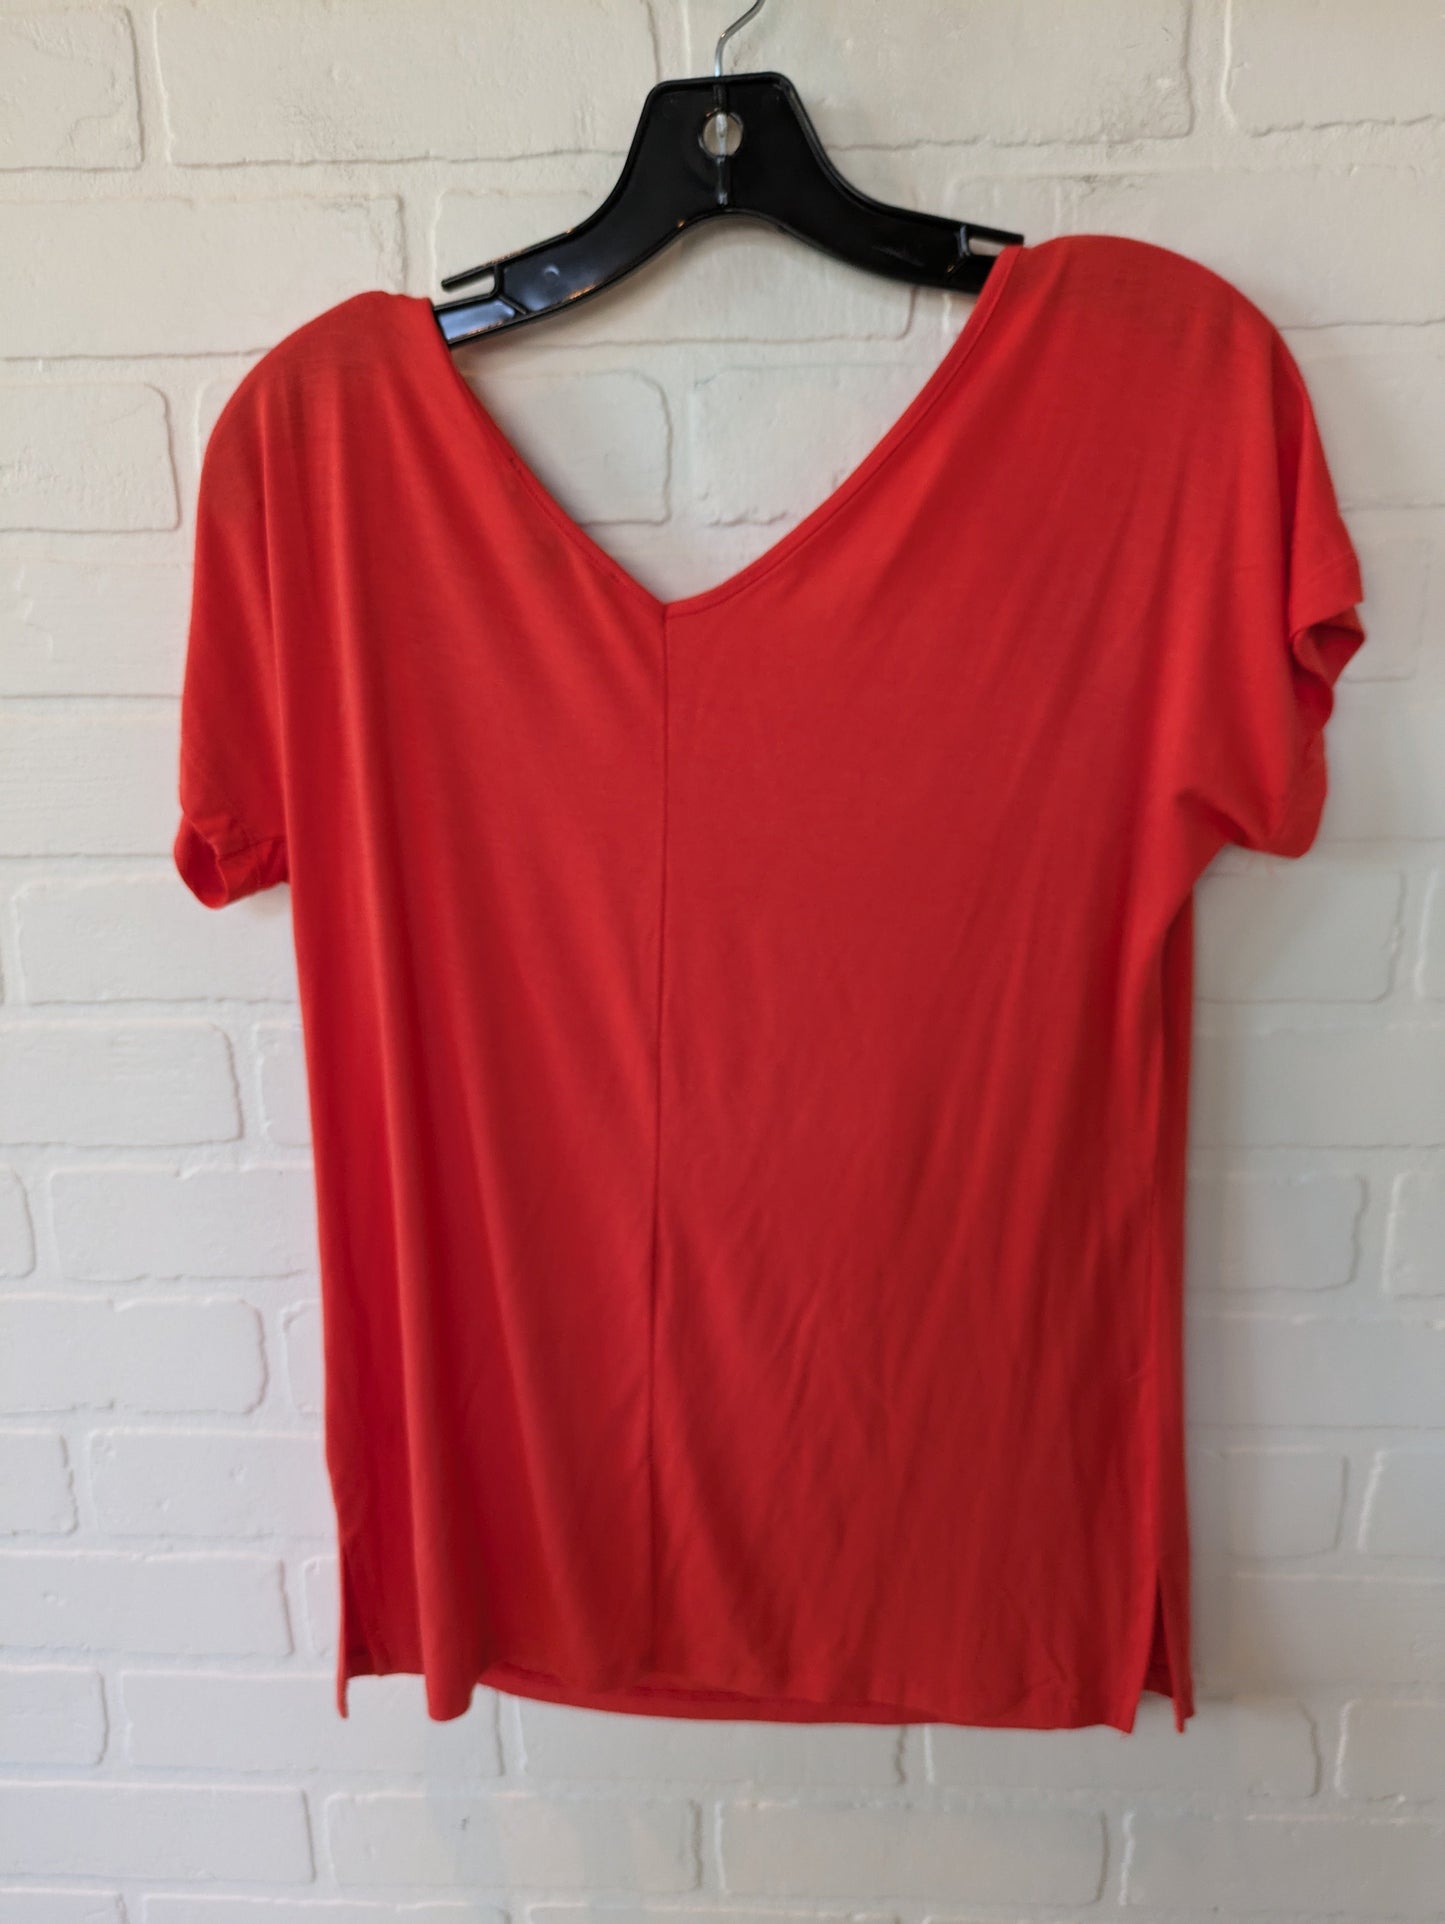 Orange Top Short Sleeve Basic Cable And Gauge, Size S